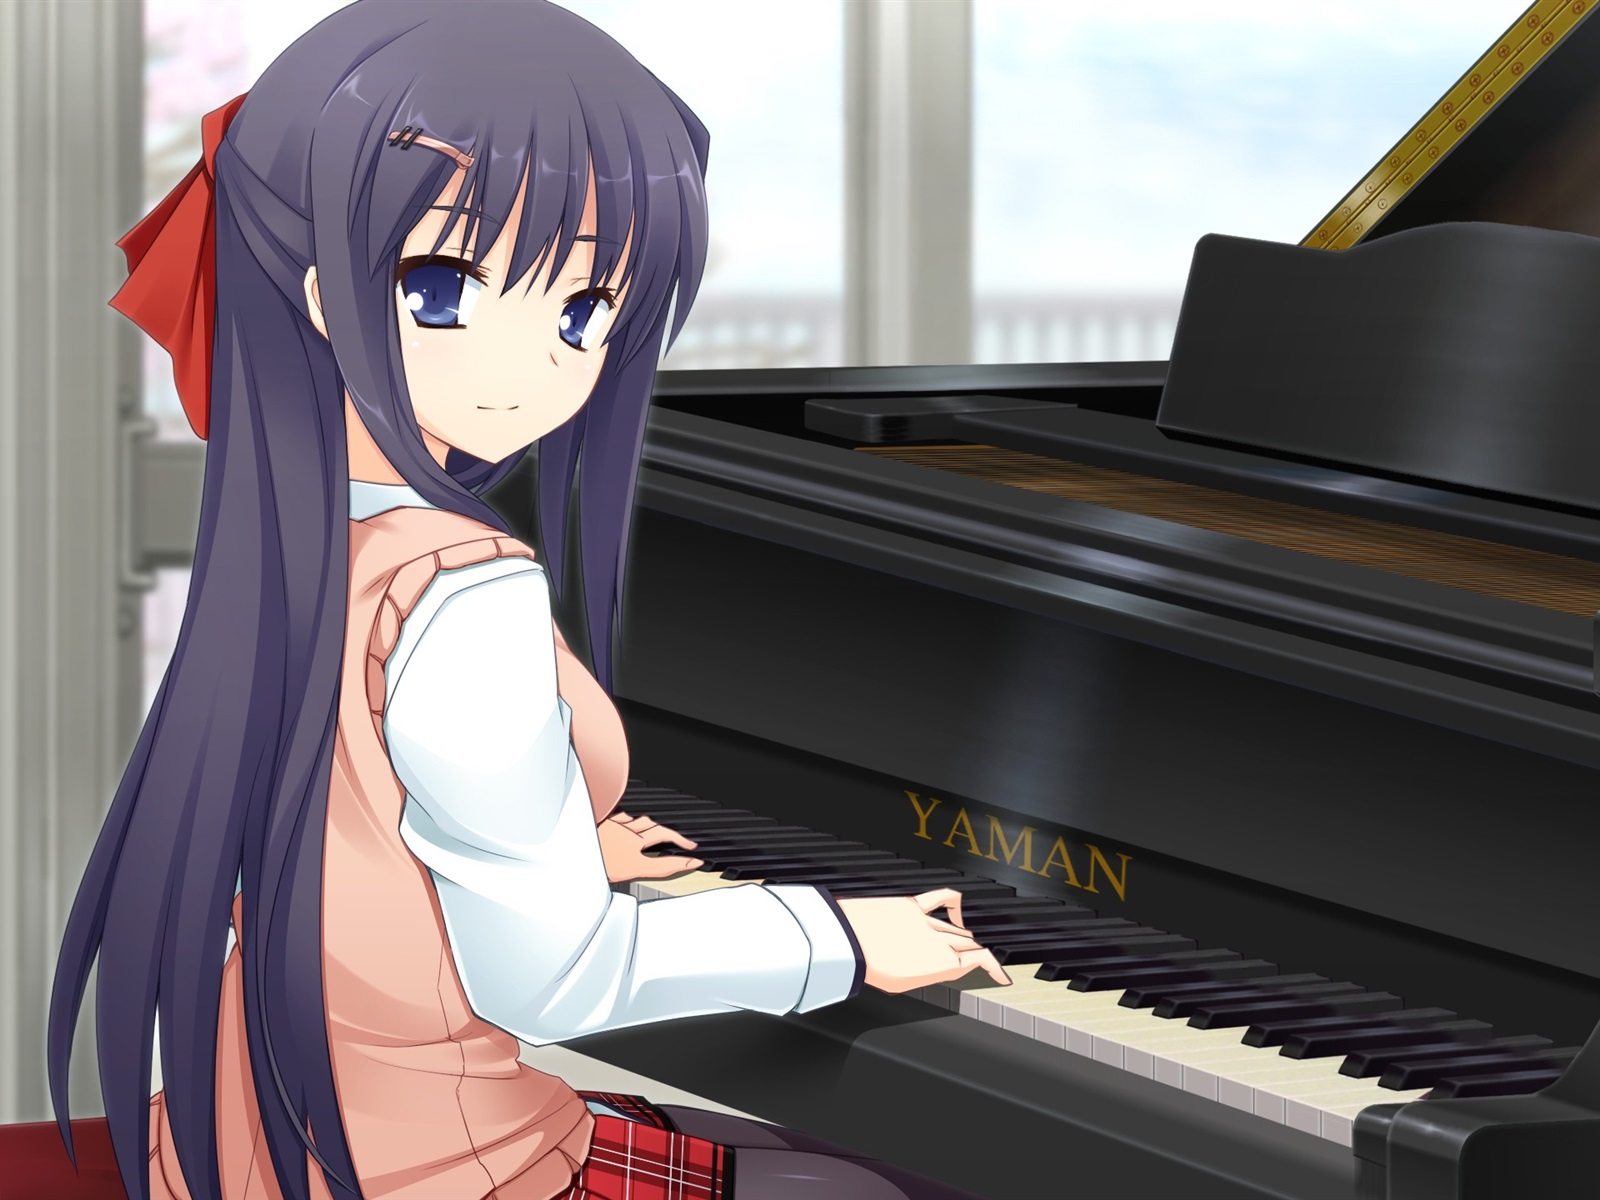 Playing Piano Image Wallpapers